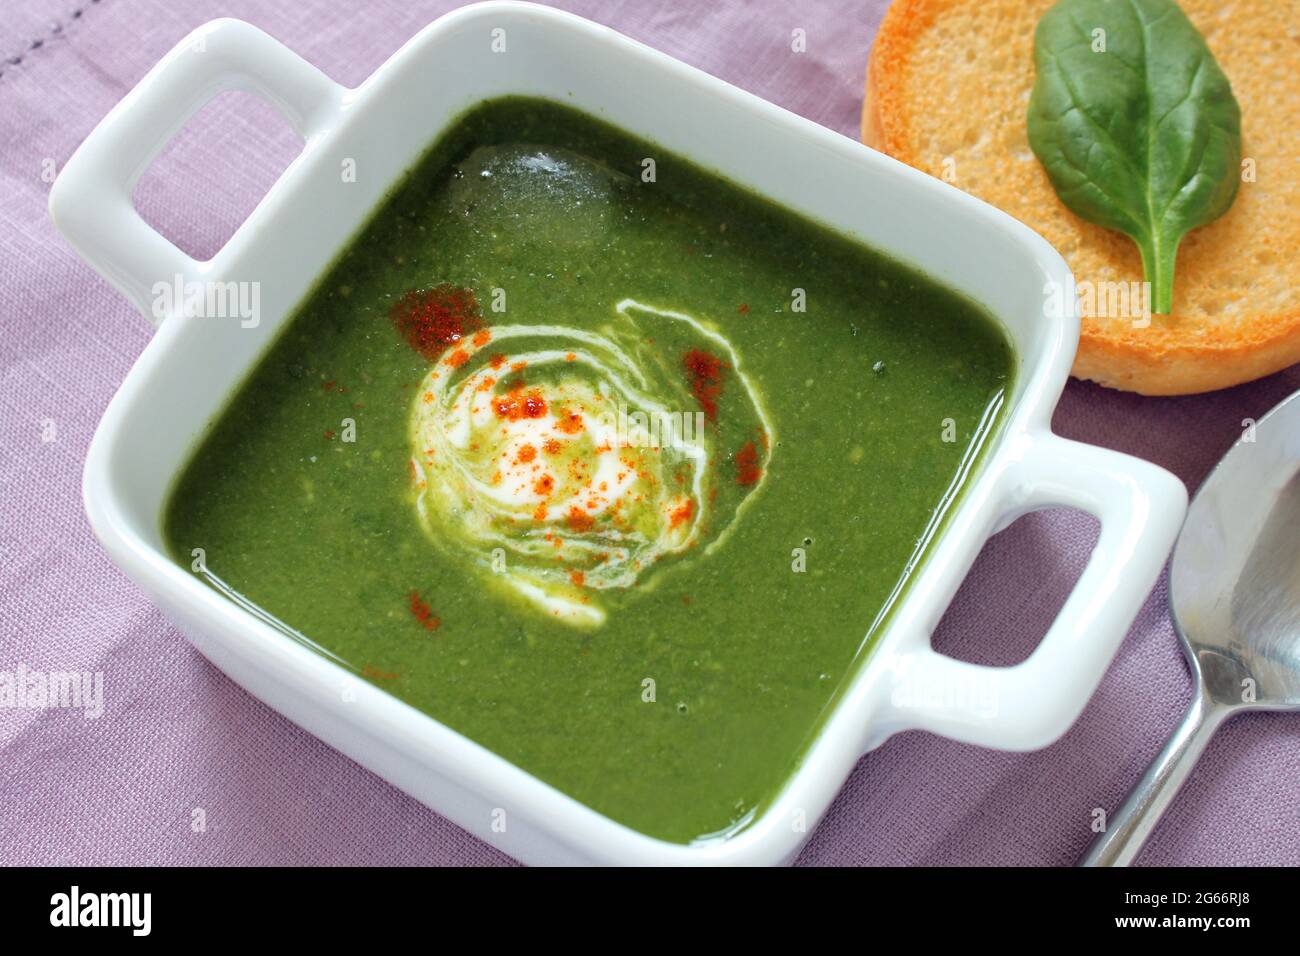 A freshly made bowl of curried spinach and coconut soup on a linen placemat. Stock Photo